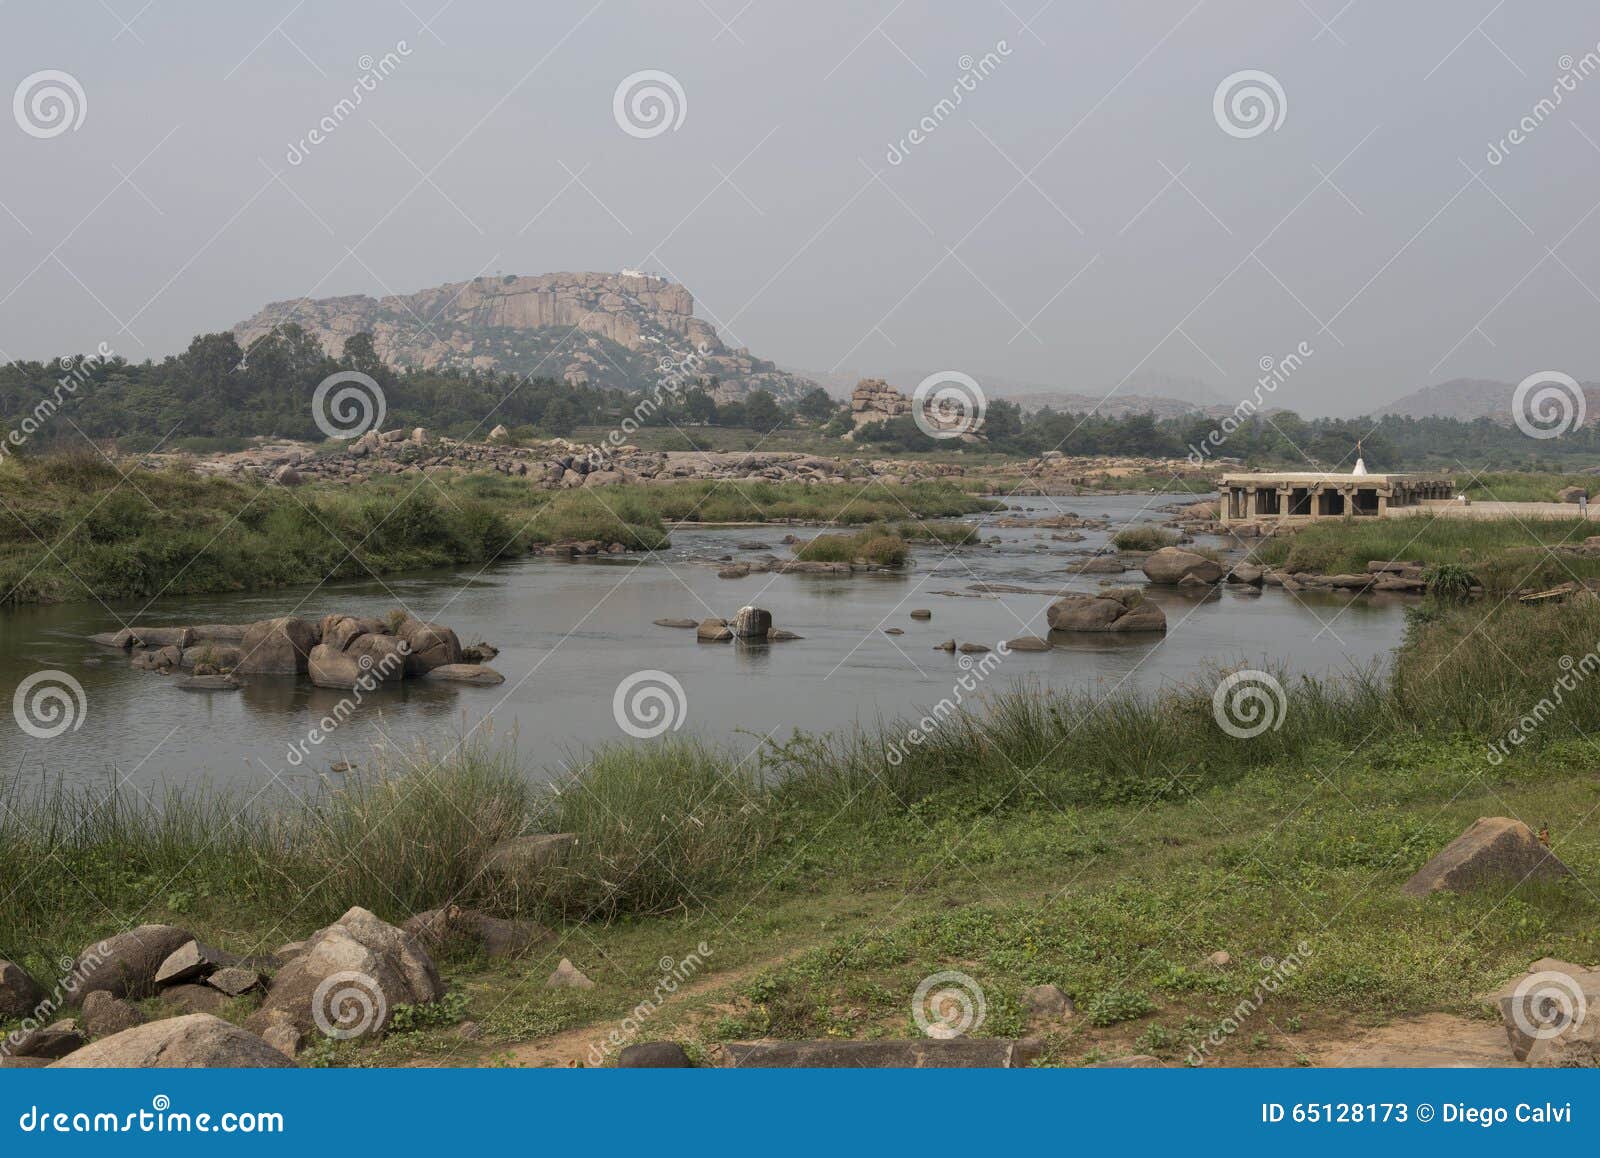 river and temple in hampi, india